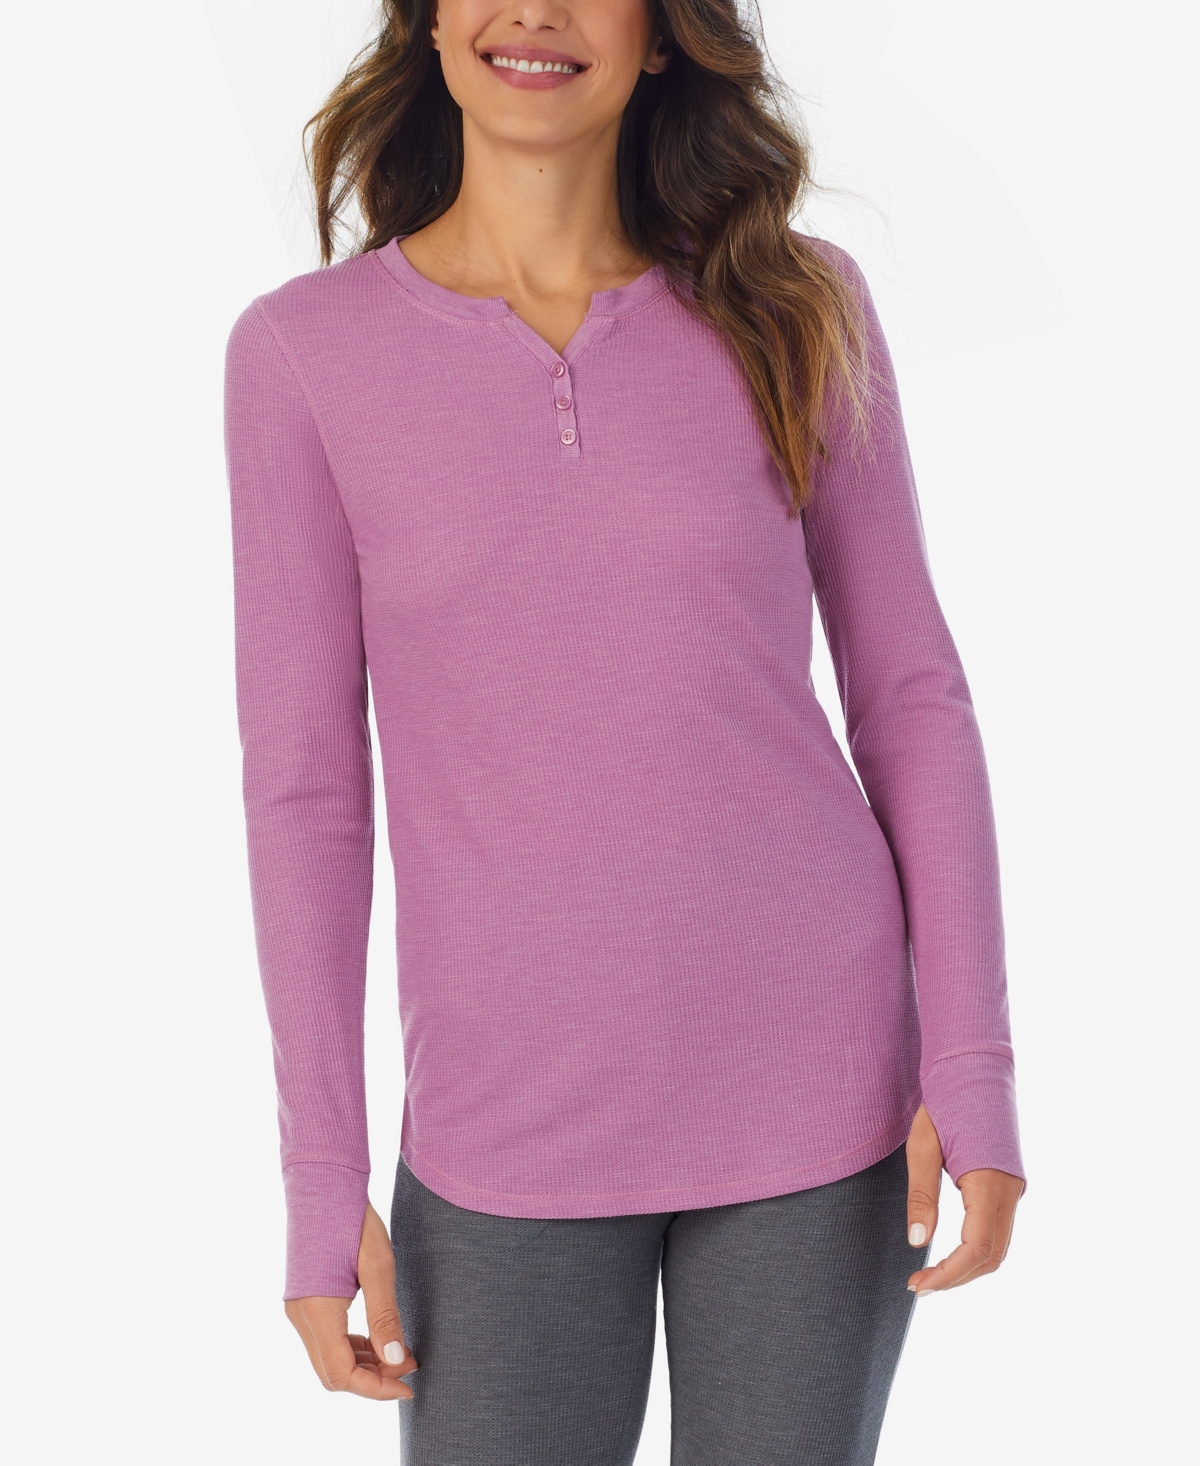 Cuddl Duds Petite Printed Thermal Henley Thumbhole Top In Mulberry Mist Heather